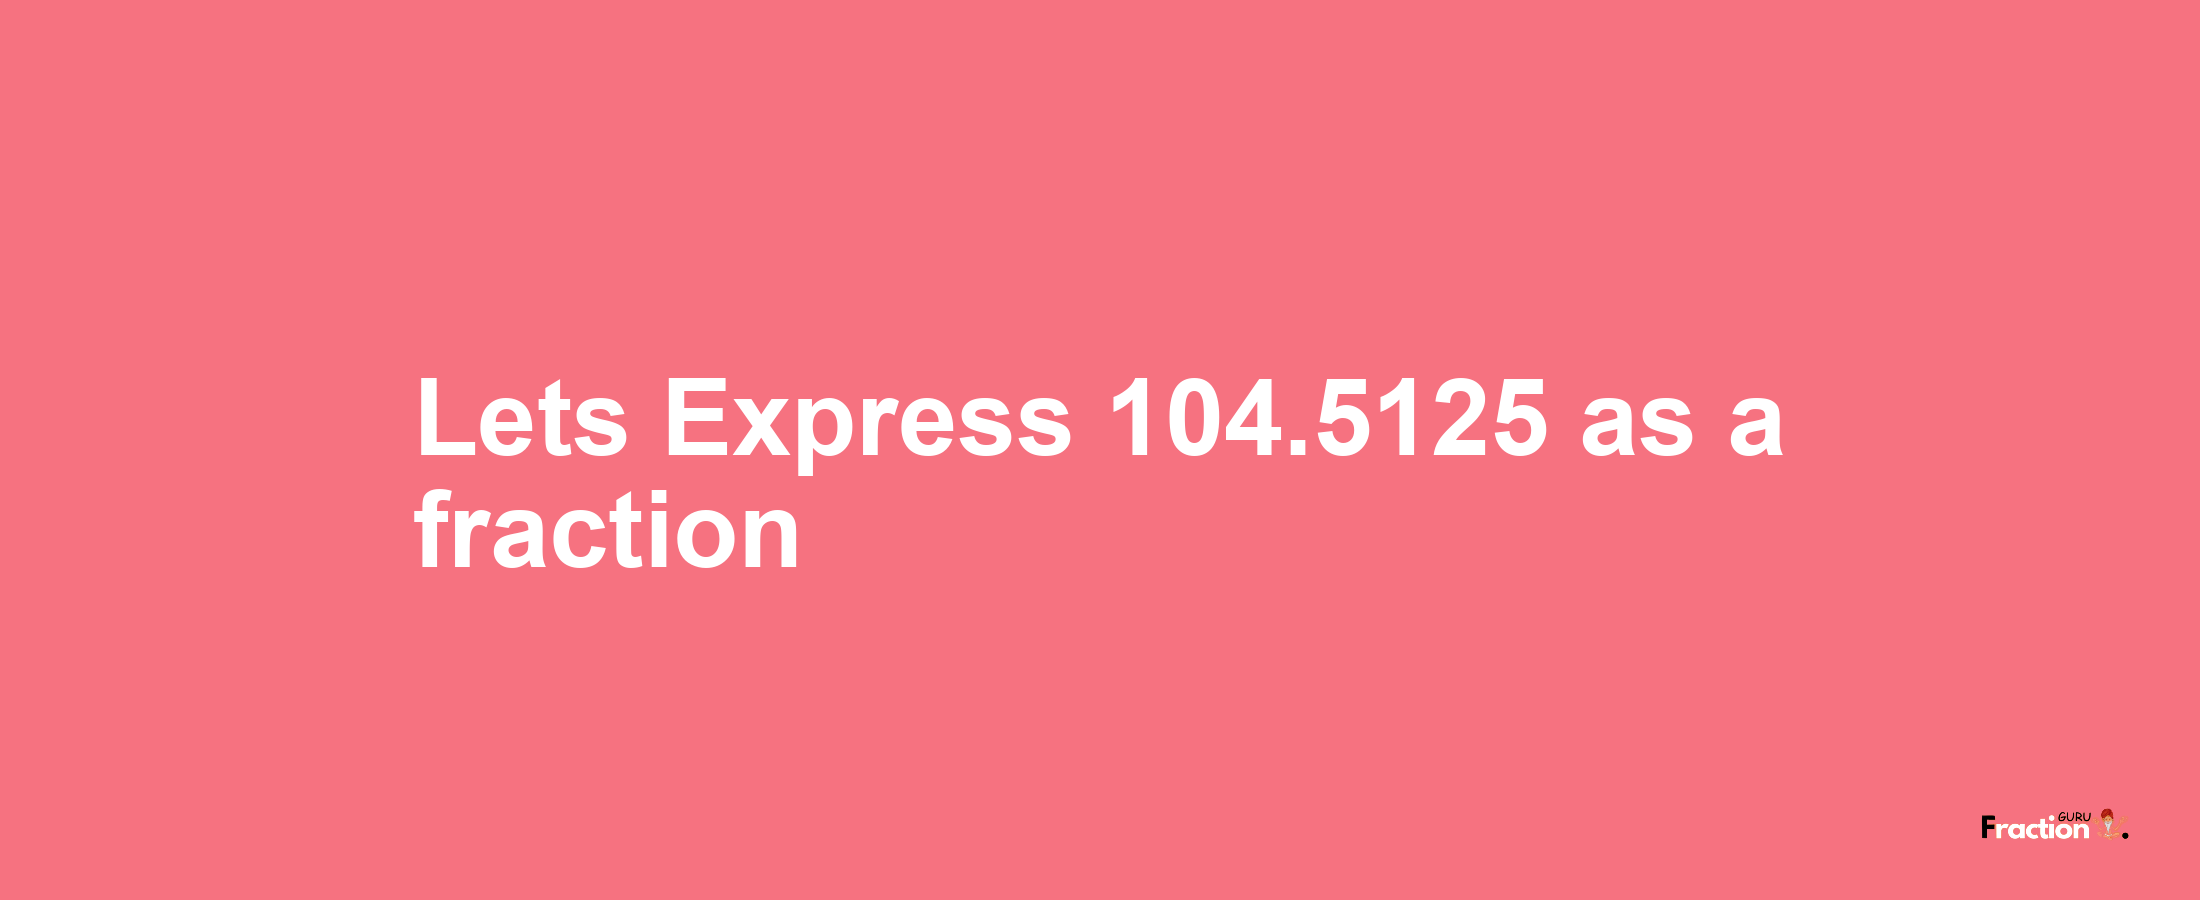 Lets Express 104.5125 as afraction